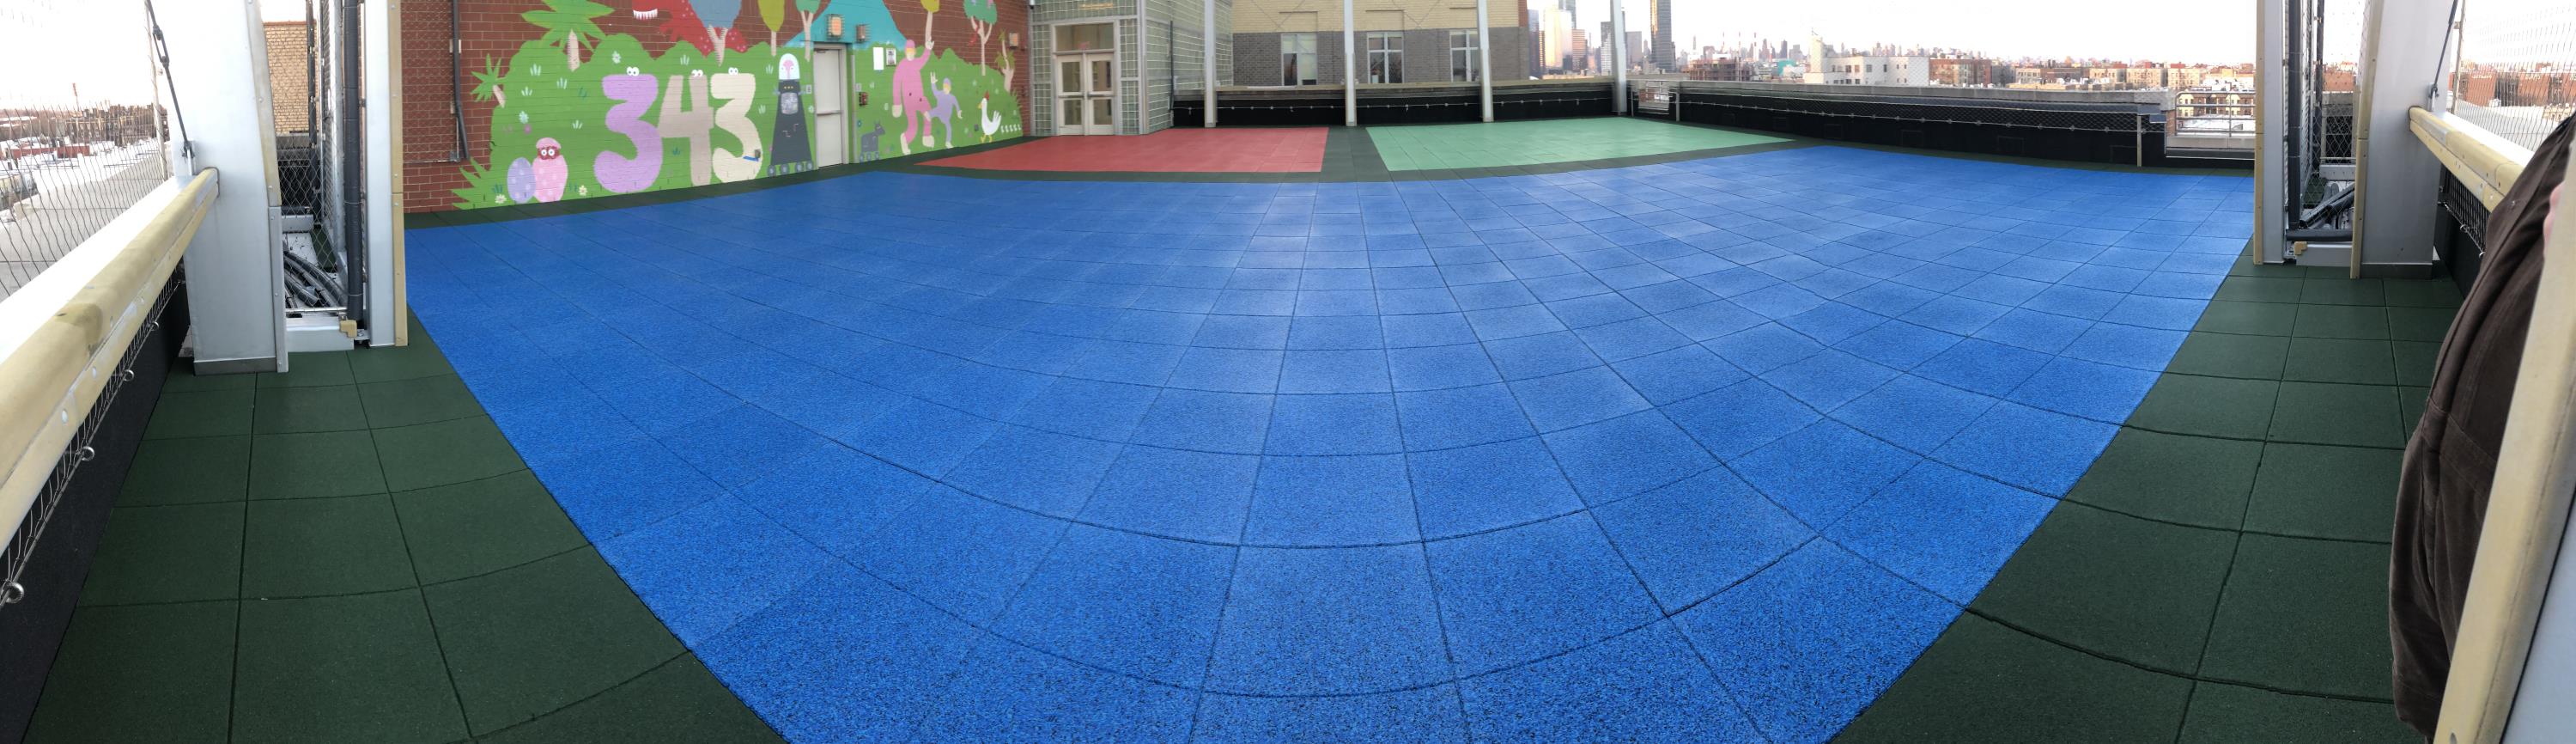 UNITY Pavers - Rooftop Patio Area at Hotel for Catered Events